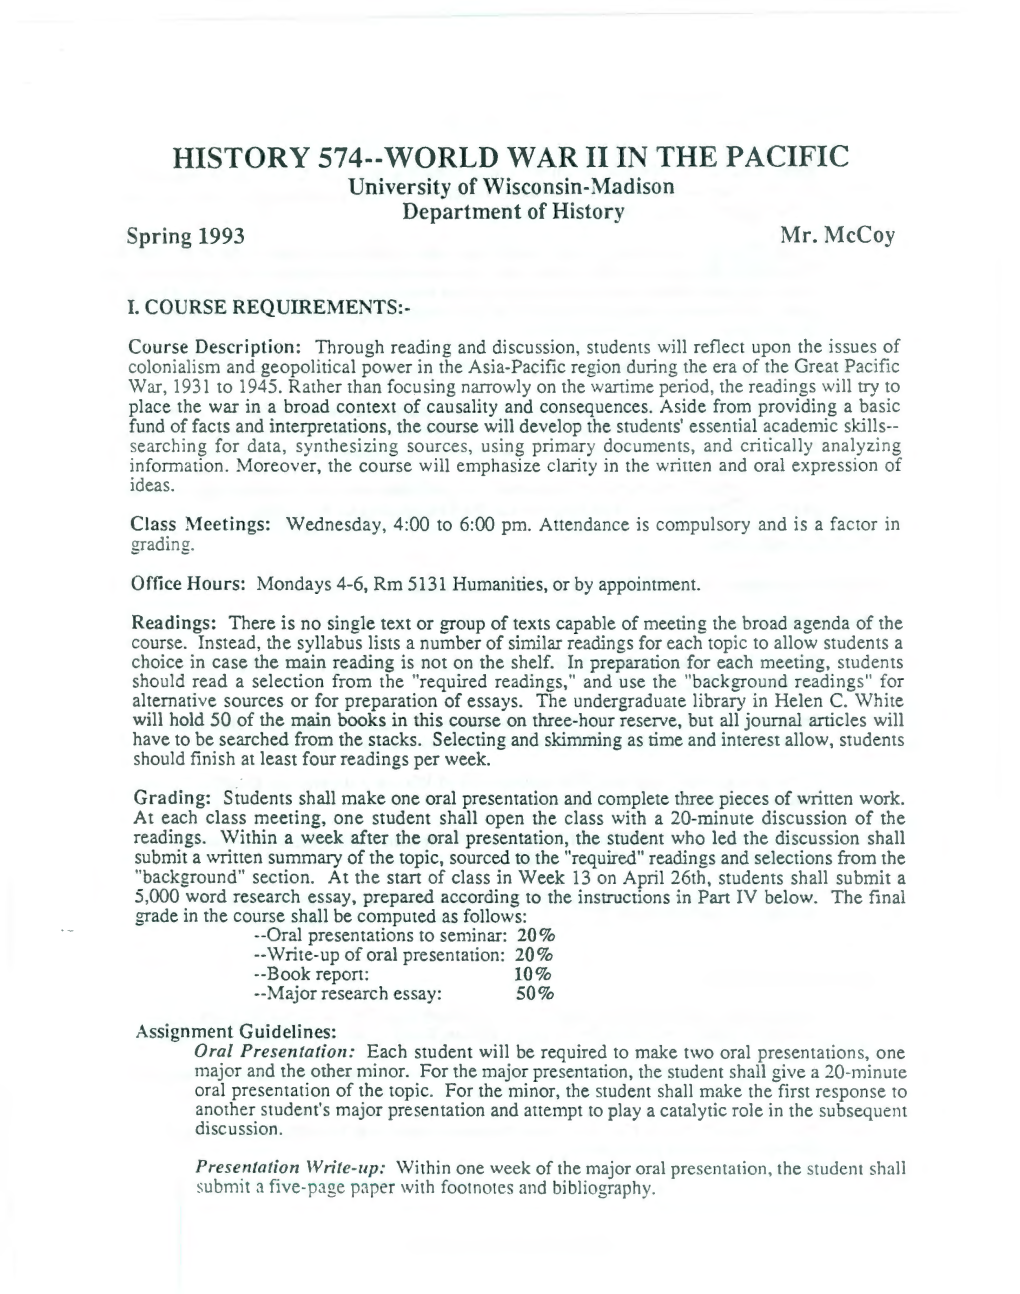 HISTORY 574--WORLD WAR II in the PACIFIC University of Wisconsin-Madison Department of History Spring 1993 Mr